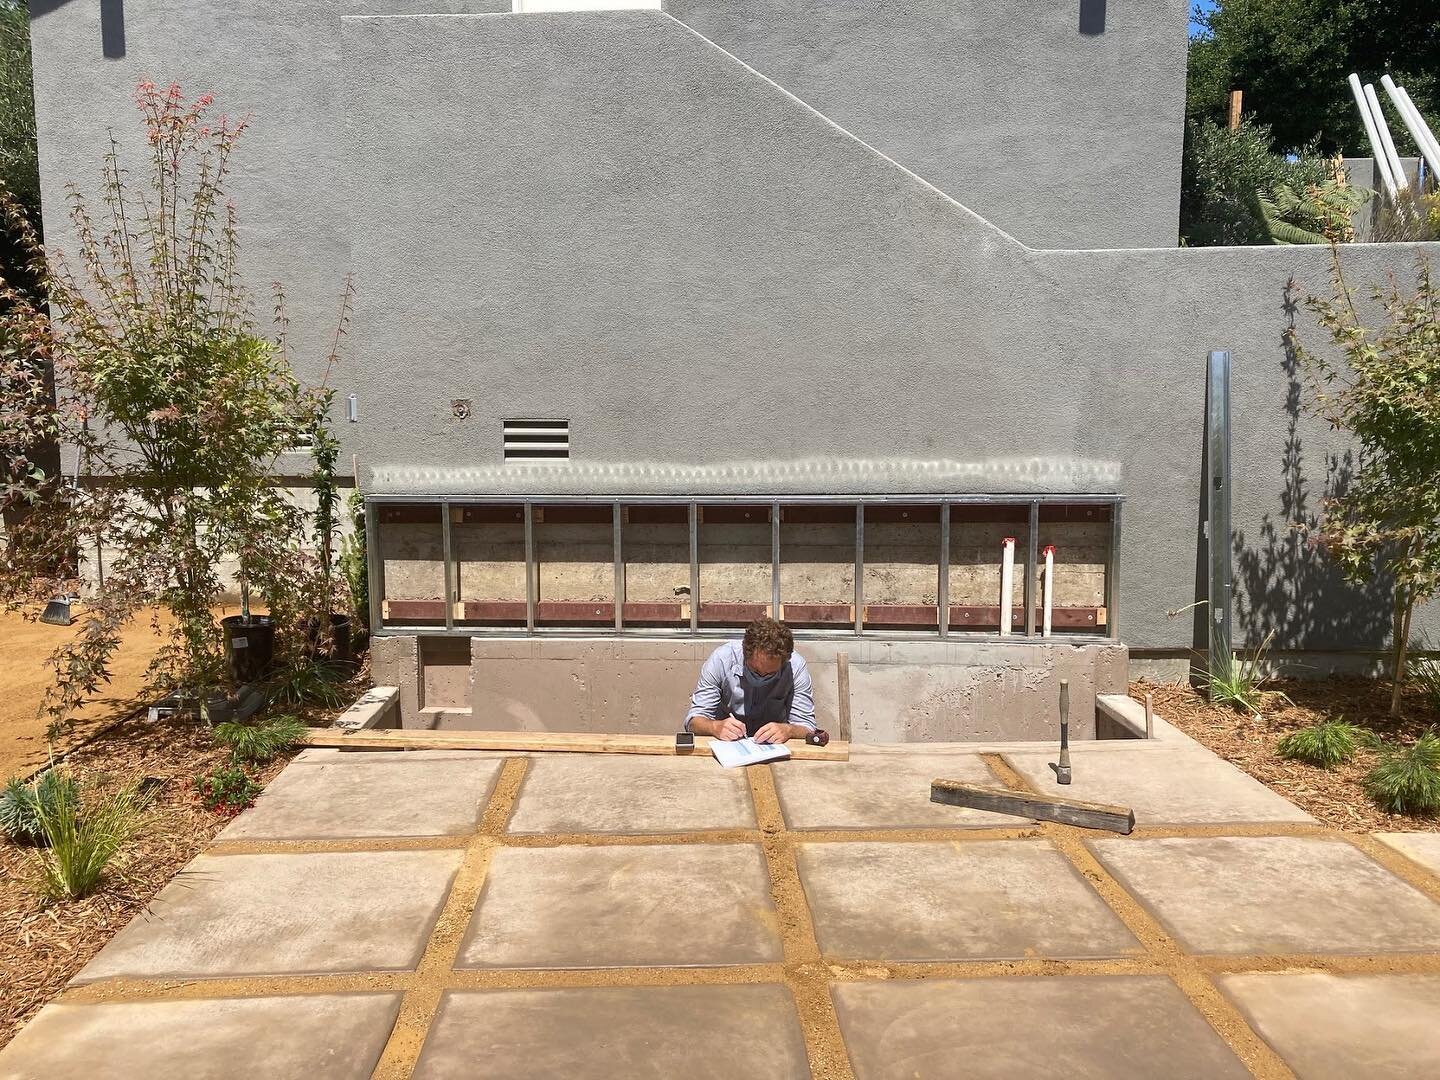 Sometimes to think outside of the box, you must sit inside the box ... or a soon to be wall fountain ⛲️ Progress at our Berkeley Hills project.